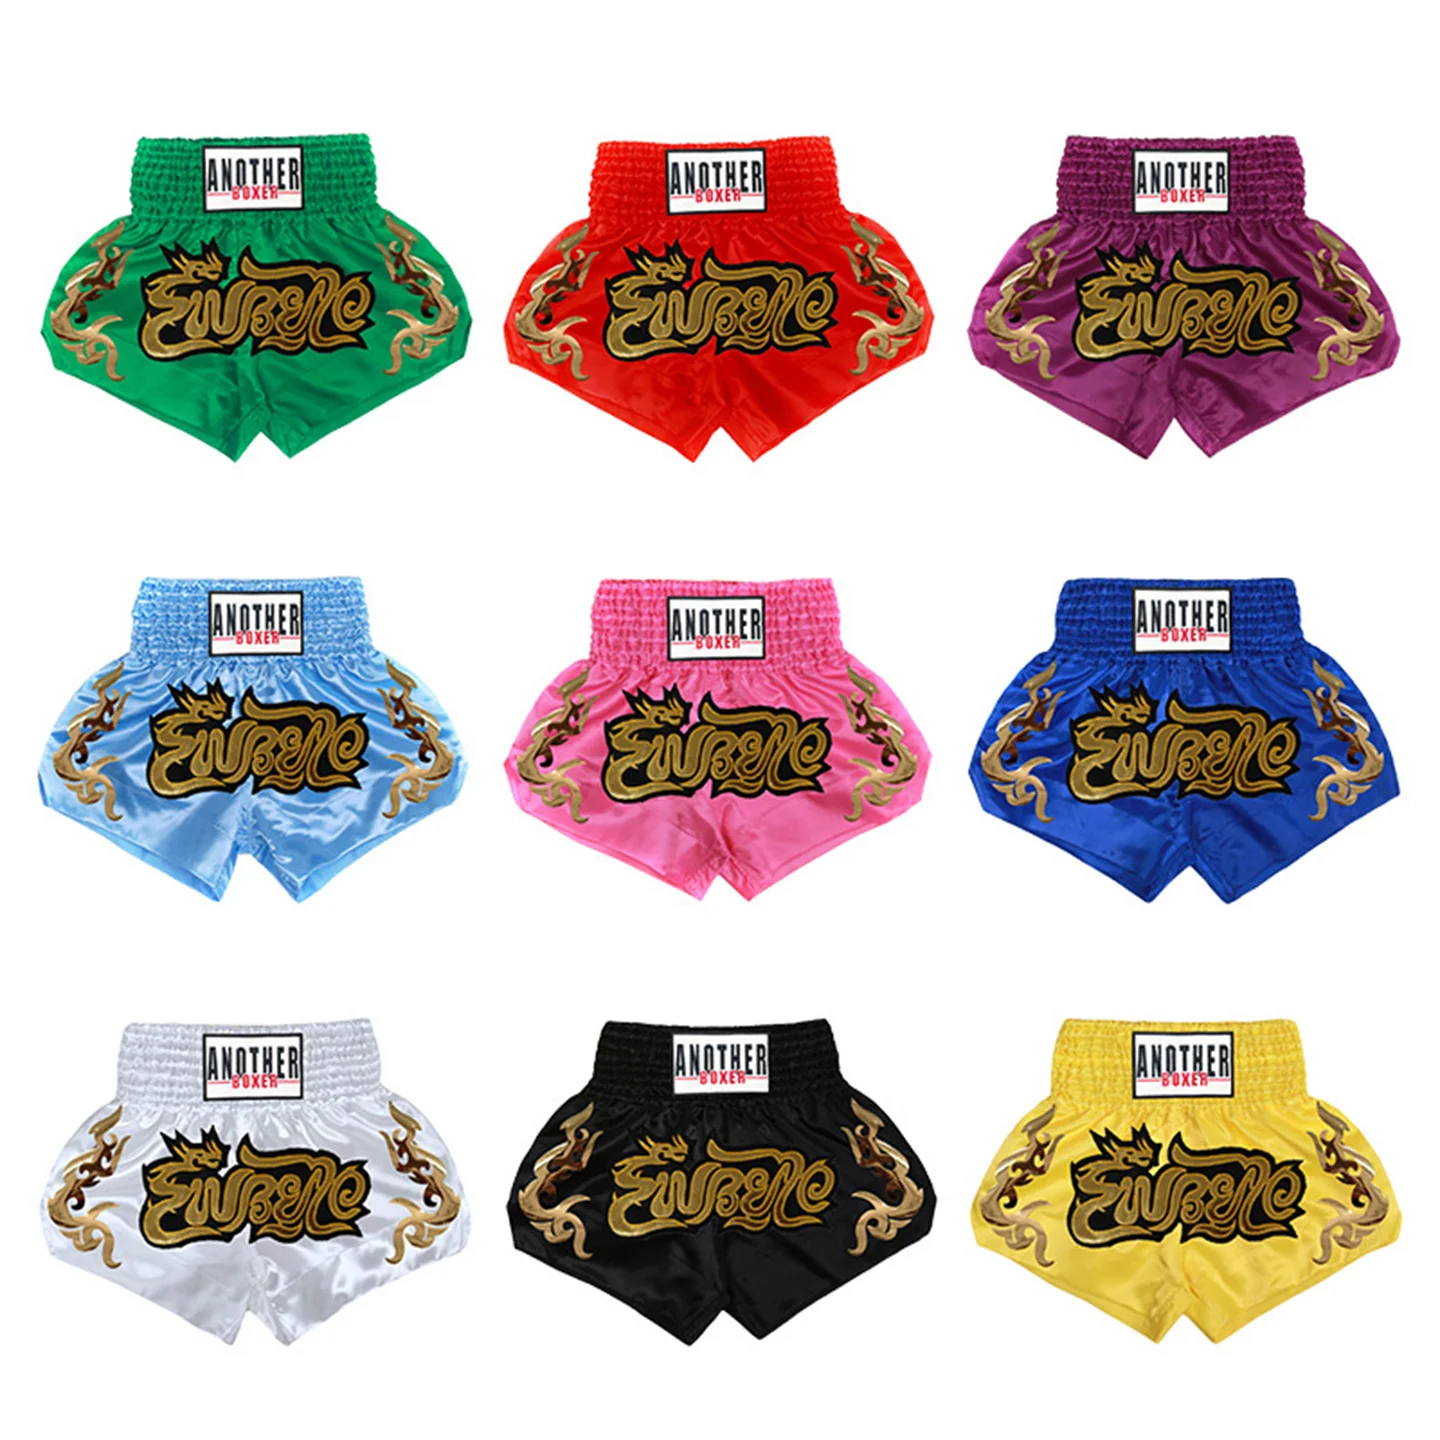 

Anotherboxer Muay Thai Shorts Authentic Embroidery Boxing Trunks Adults And Children Free Fighting Sanda Training Half Pants